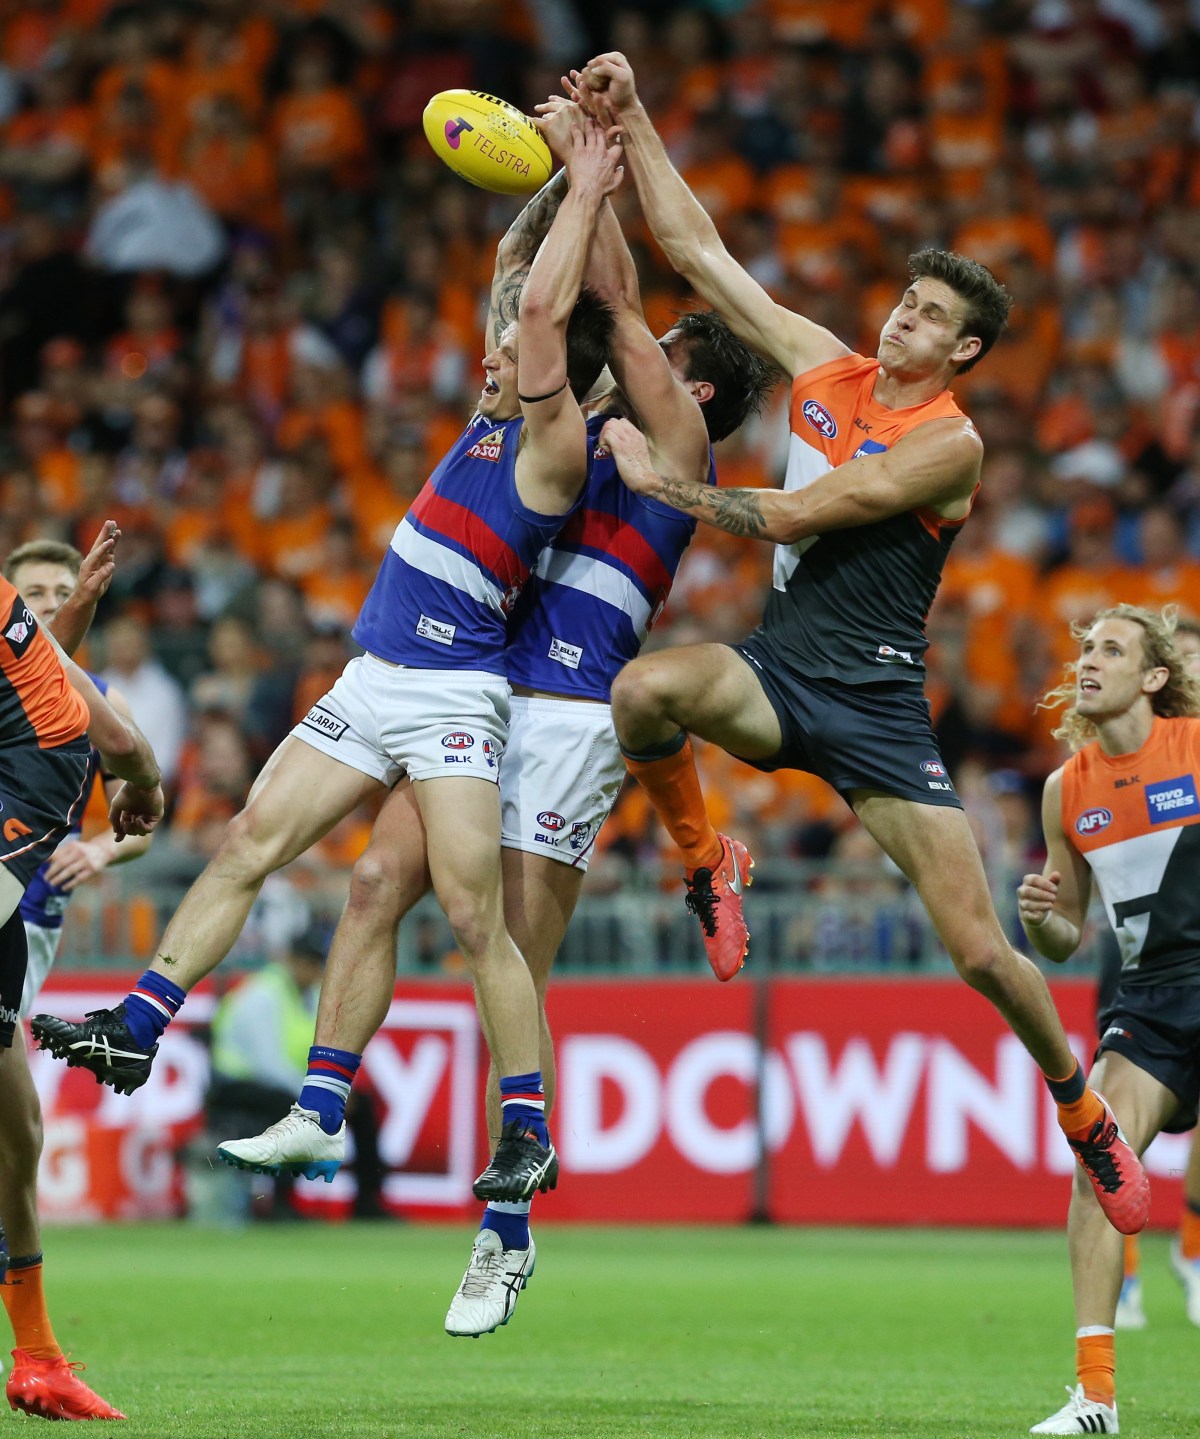 Rory Lobb of GWS goes for the ball during the AFL preliminary final between the Greater Western Sydney Giants and the Western Bulldogs at Spotless Stadium in Sydney, Saturday, Sept. 24, 2016. (AAP Image/Craig Golding) NO ARCHIVING, EDITORIAL USE ONLY